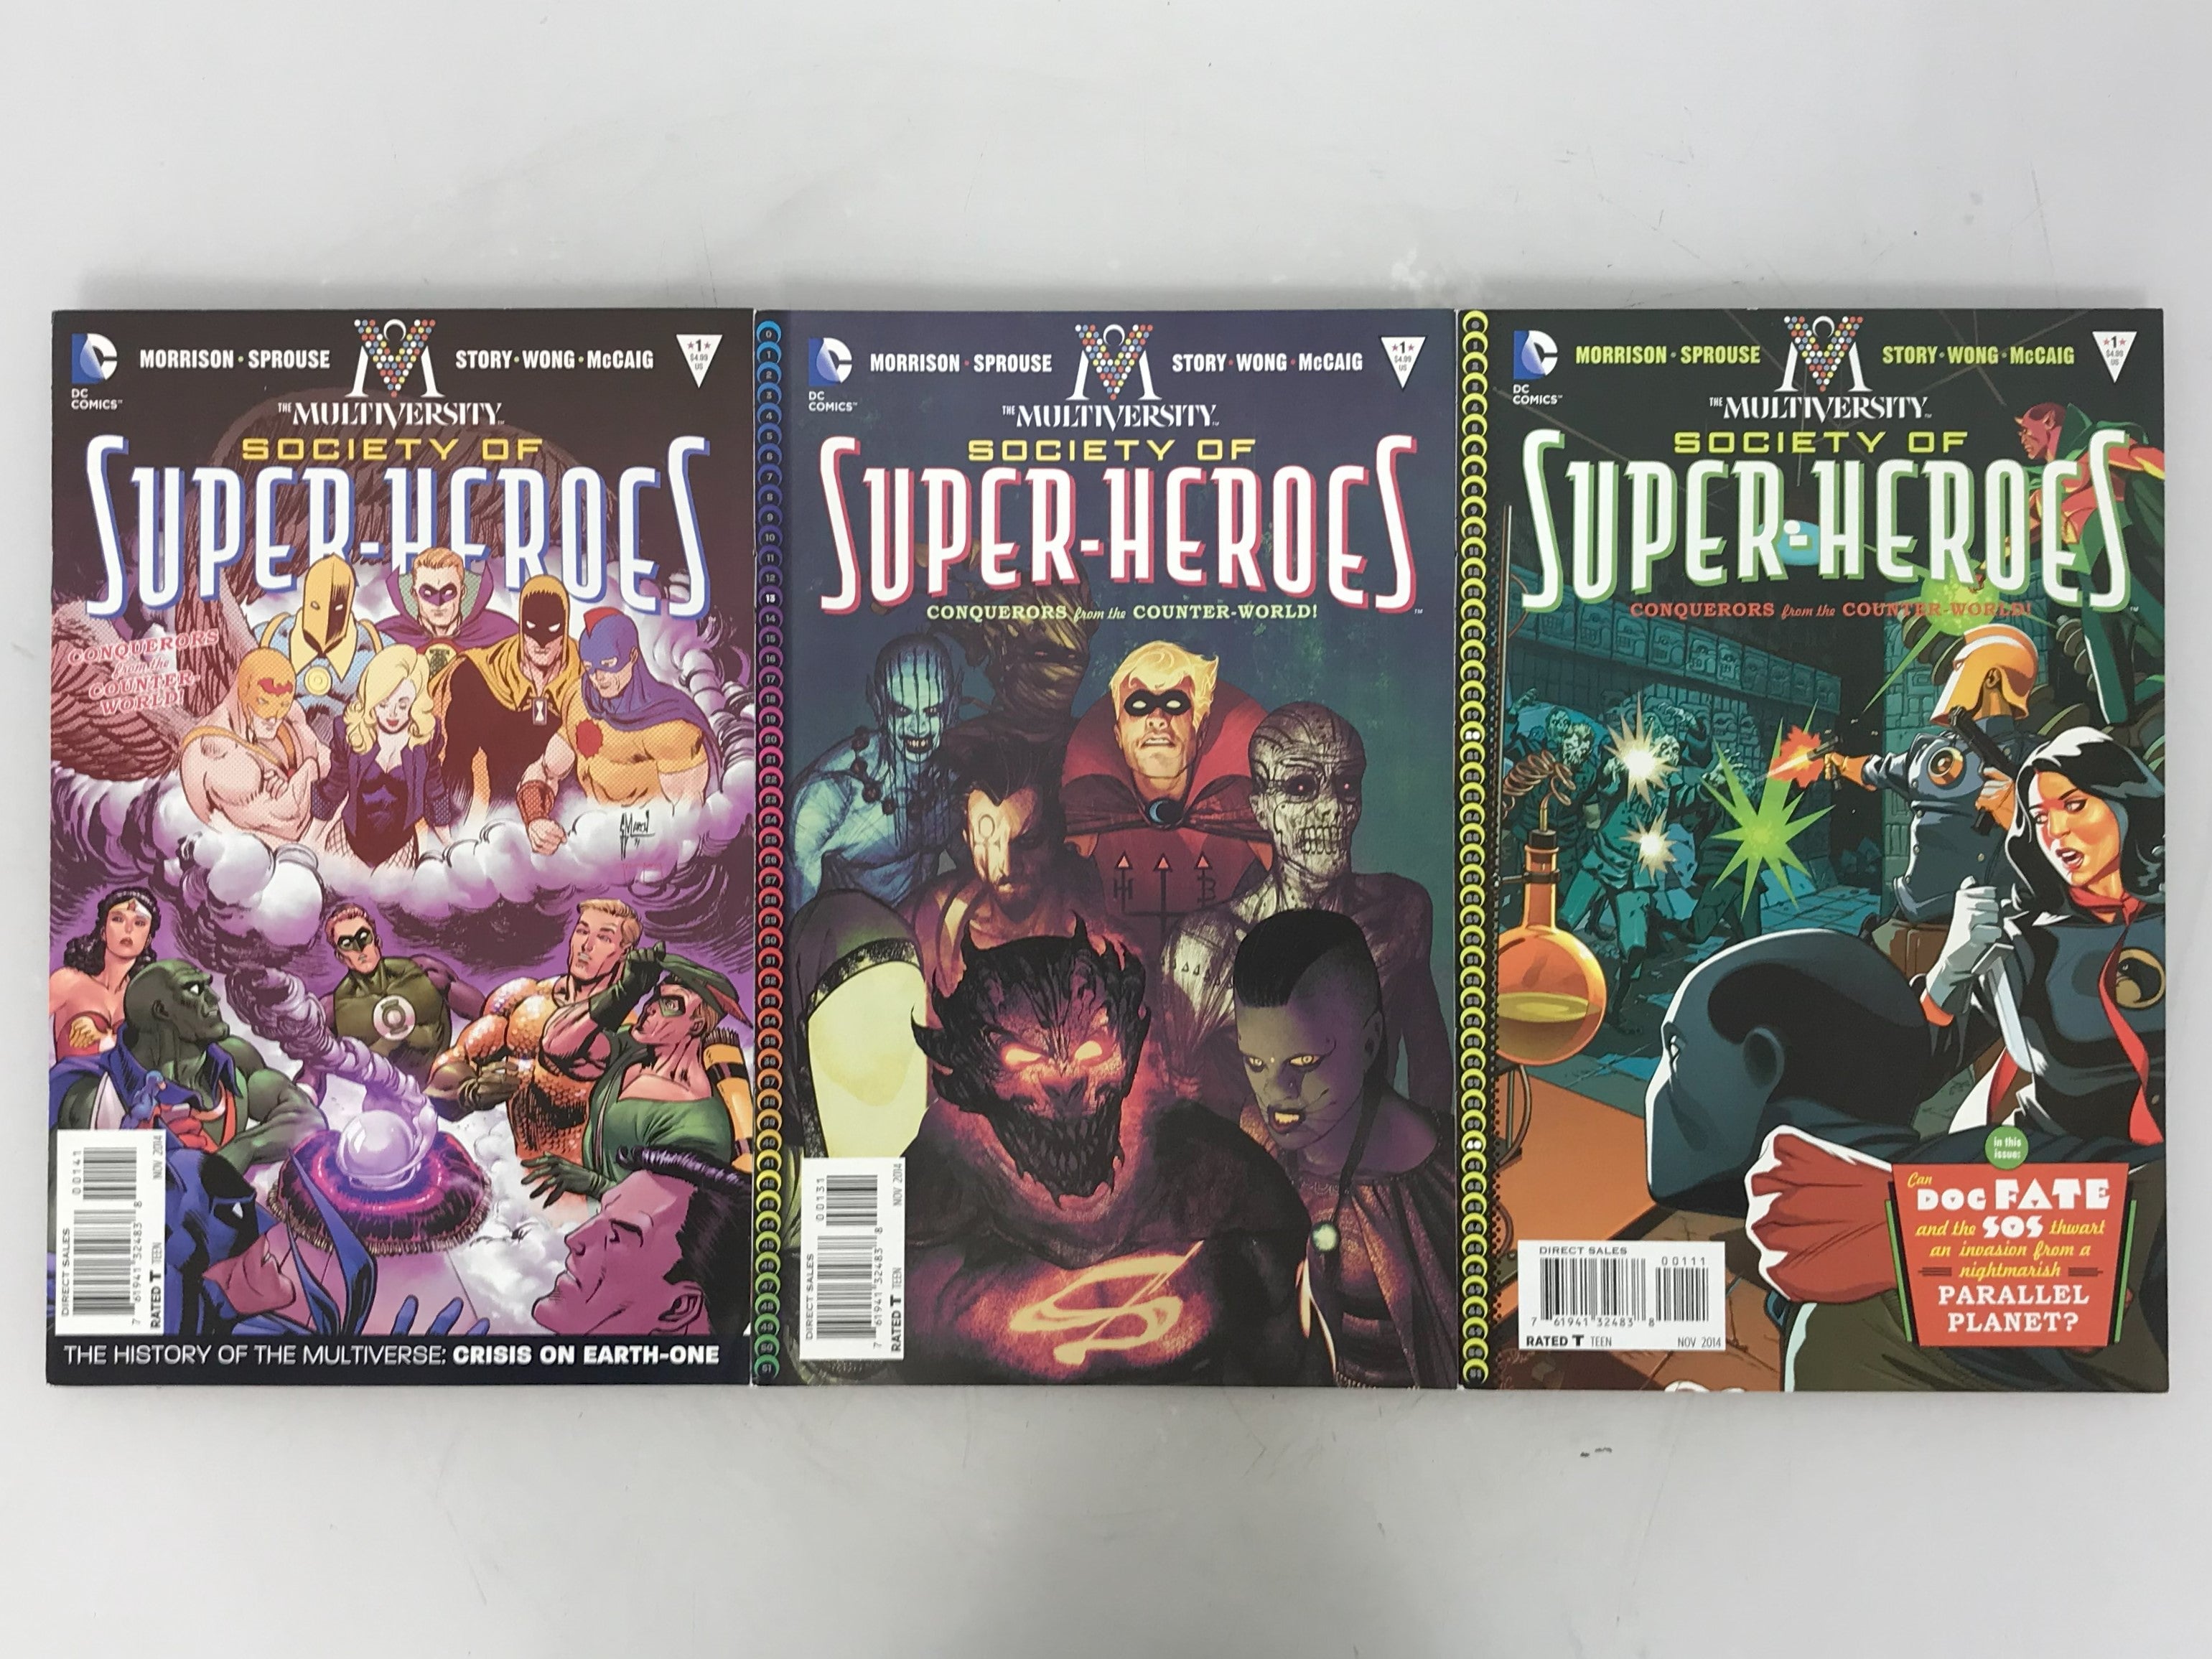 Lot of 3 The Multiversity: The Society of Super-Heroes: Conquerors of the Counter-World 1 2014 Variant Covers